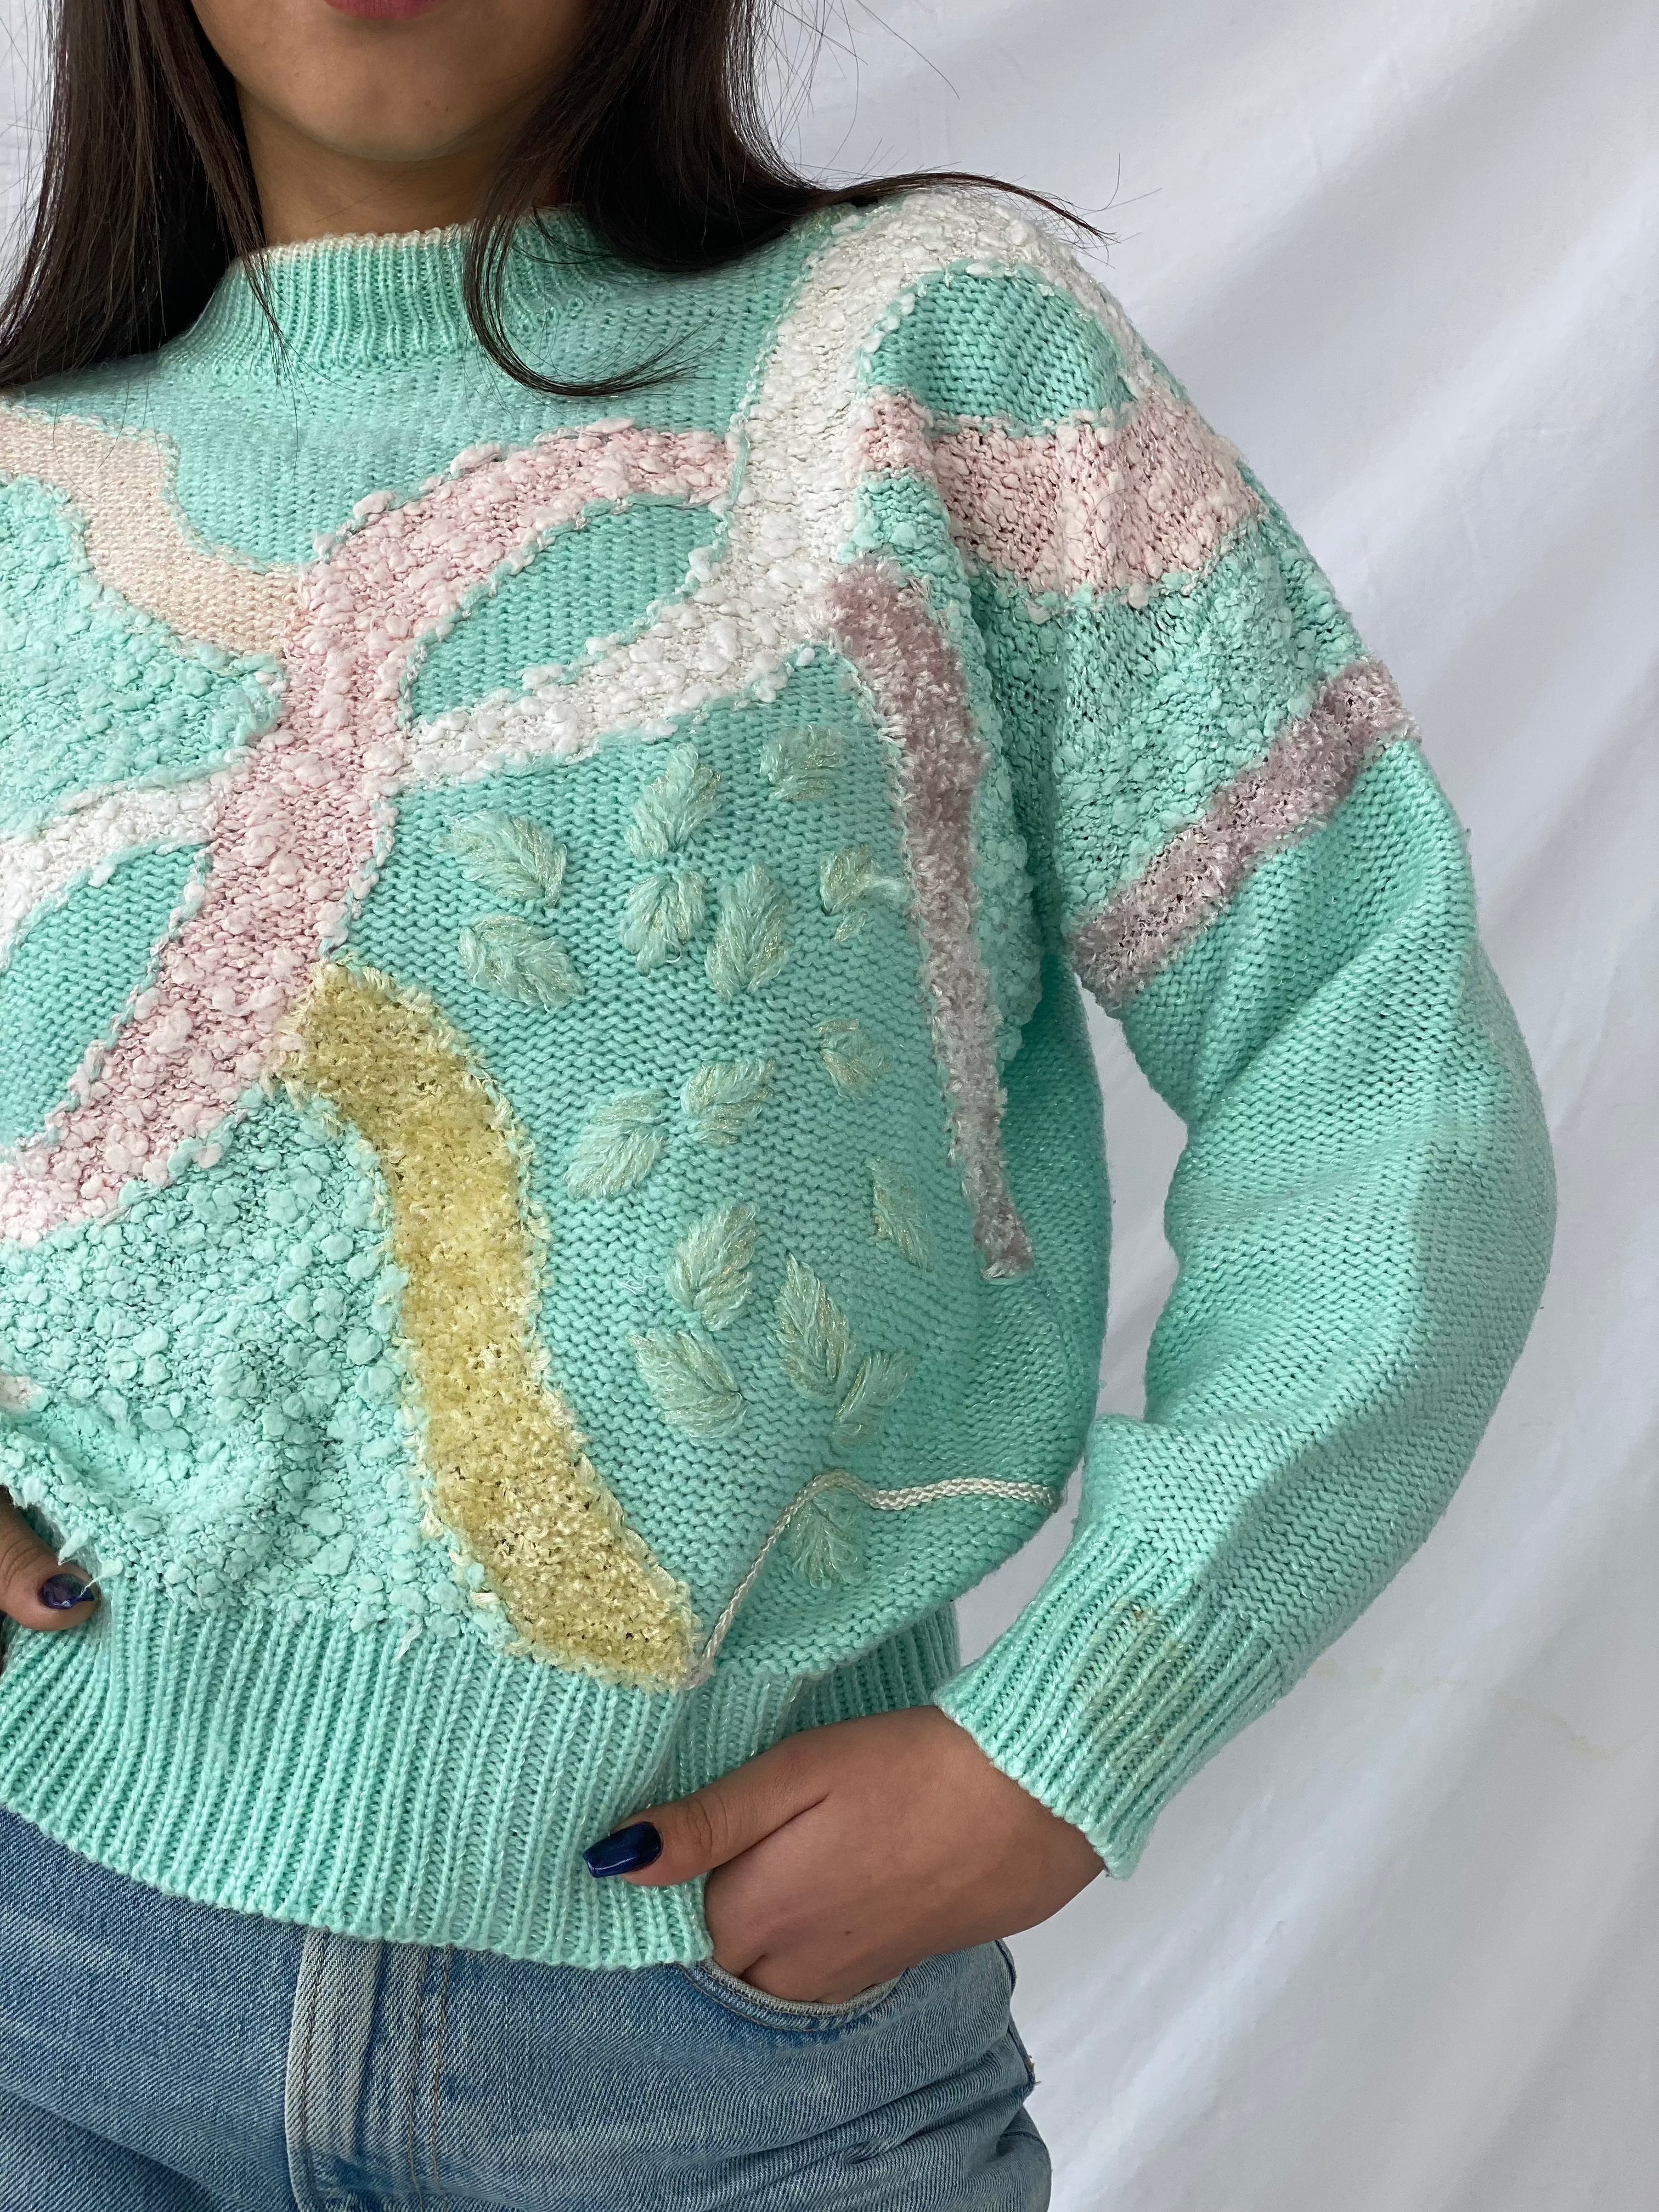 Vintage Jaclyn Smith Pastel Crewneck Sweater - Balagan Vintage Sweater 80s, 90s, knitted sweater, pastel, printed sweater, sweater